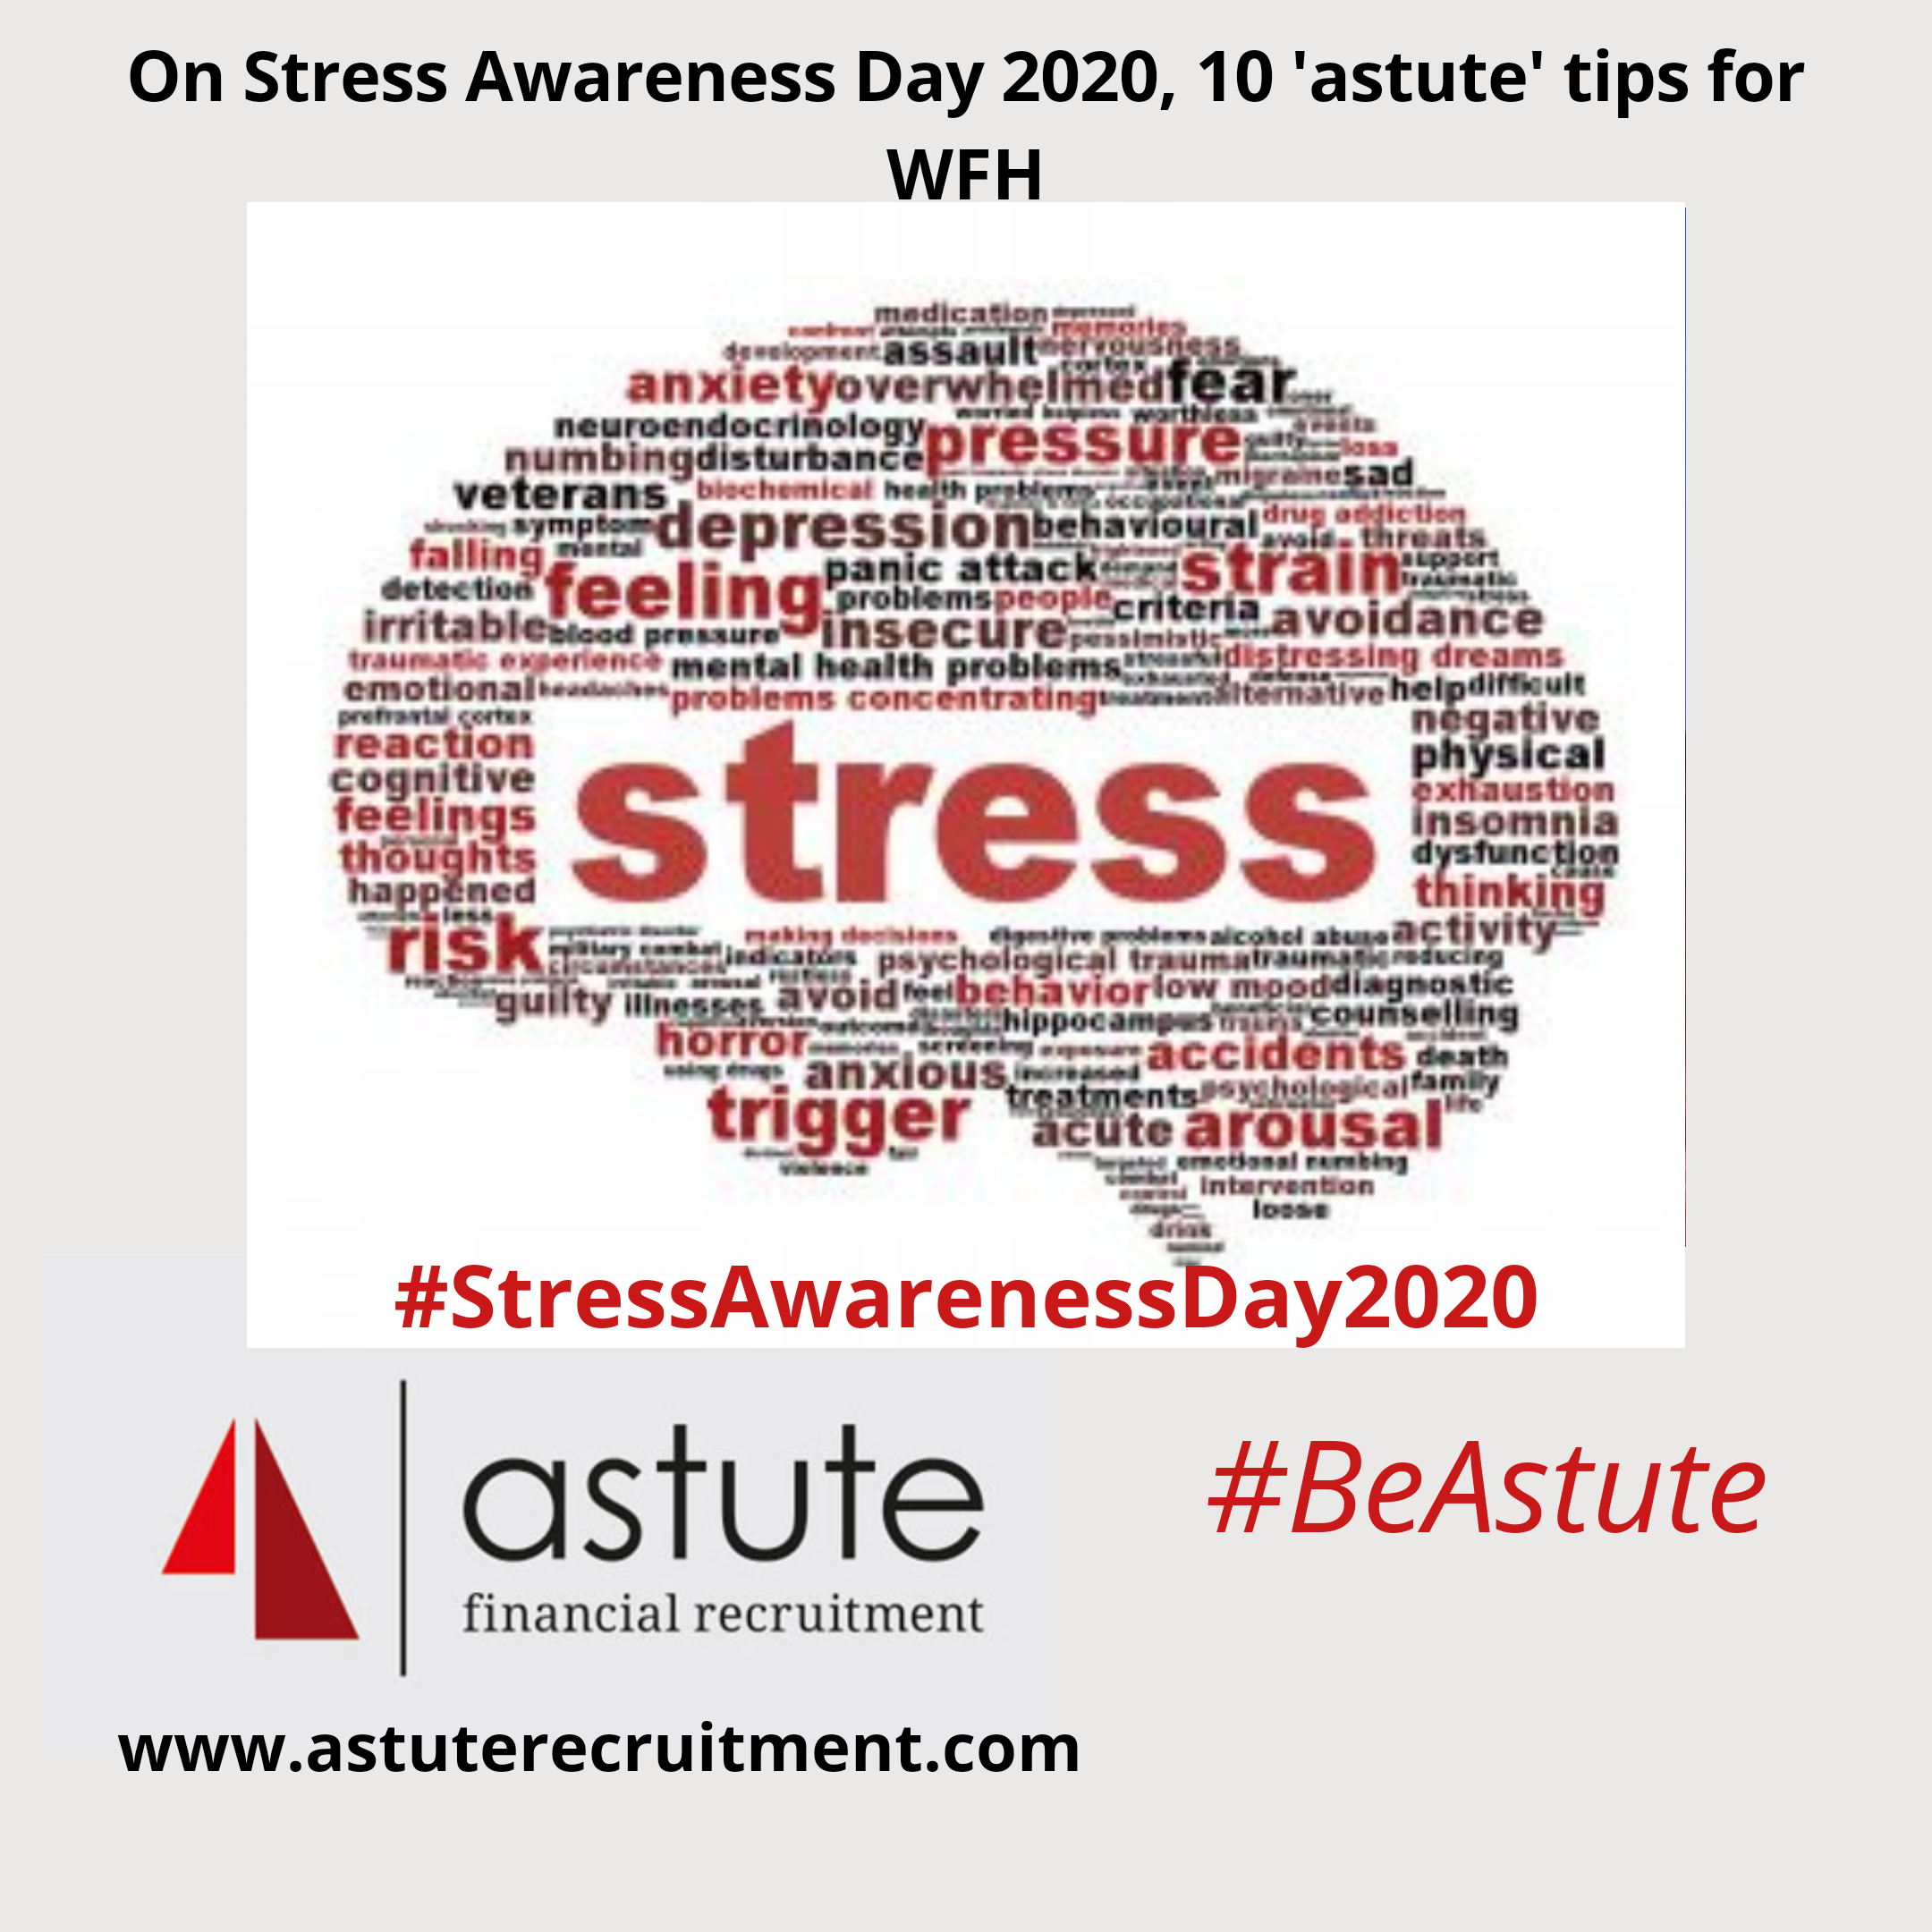 On Stress Awareness Day 2020: Our 10 ‘astute’ tips for working from home